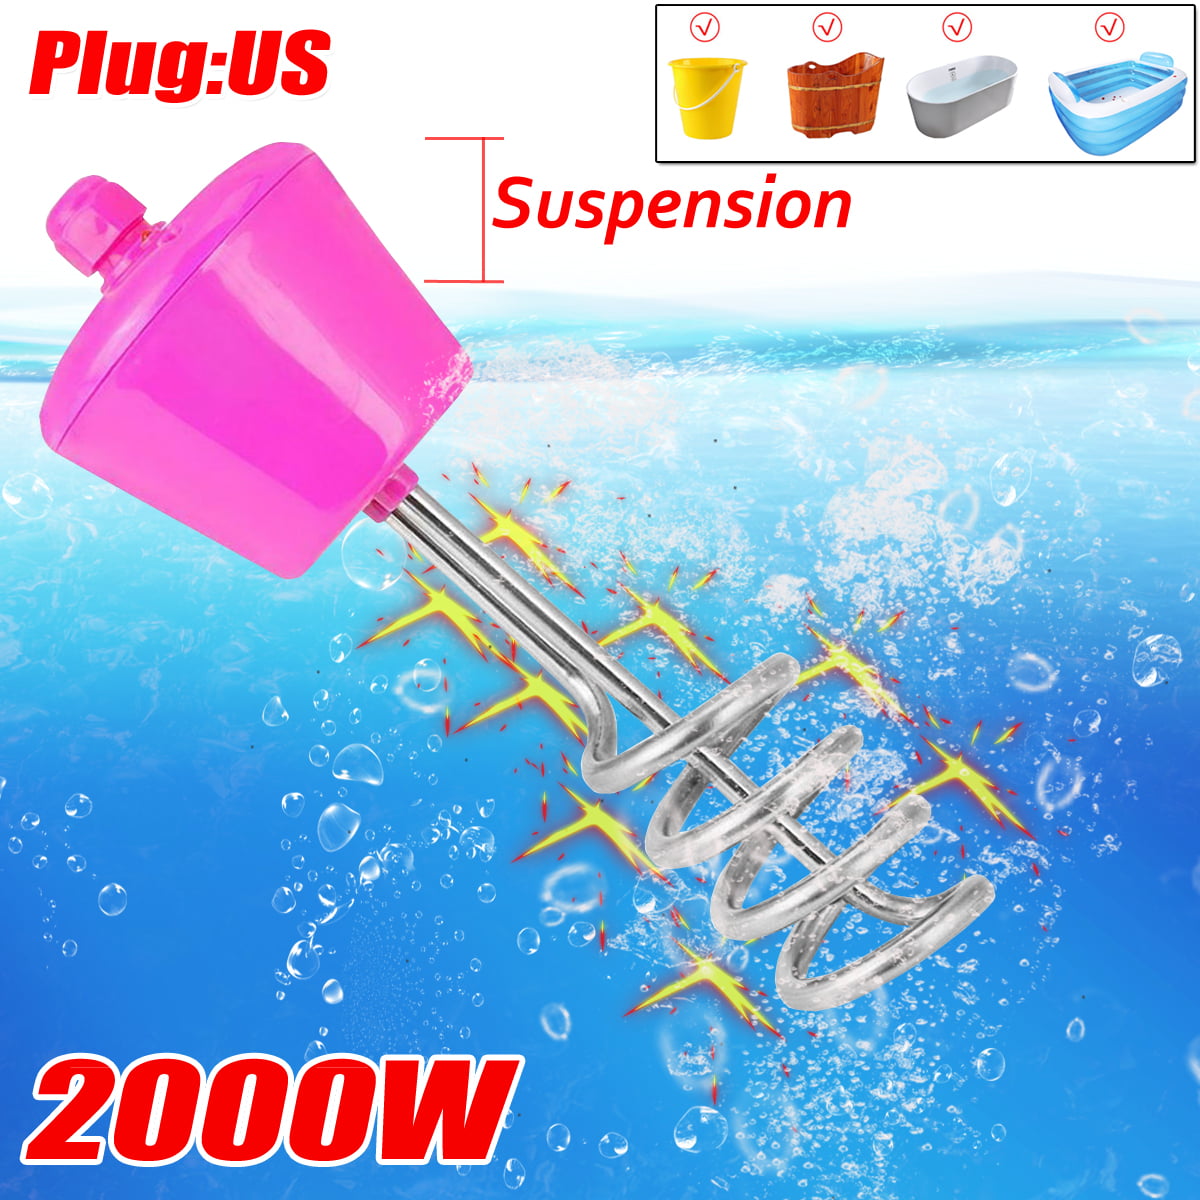 Water Heating Element Haofy 3000W High Power Stainless Steel Floating Immersion Element Water Heater Portable Suspension Electric Spiral Immersion Water Heating Element